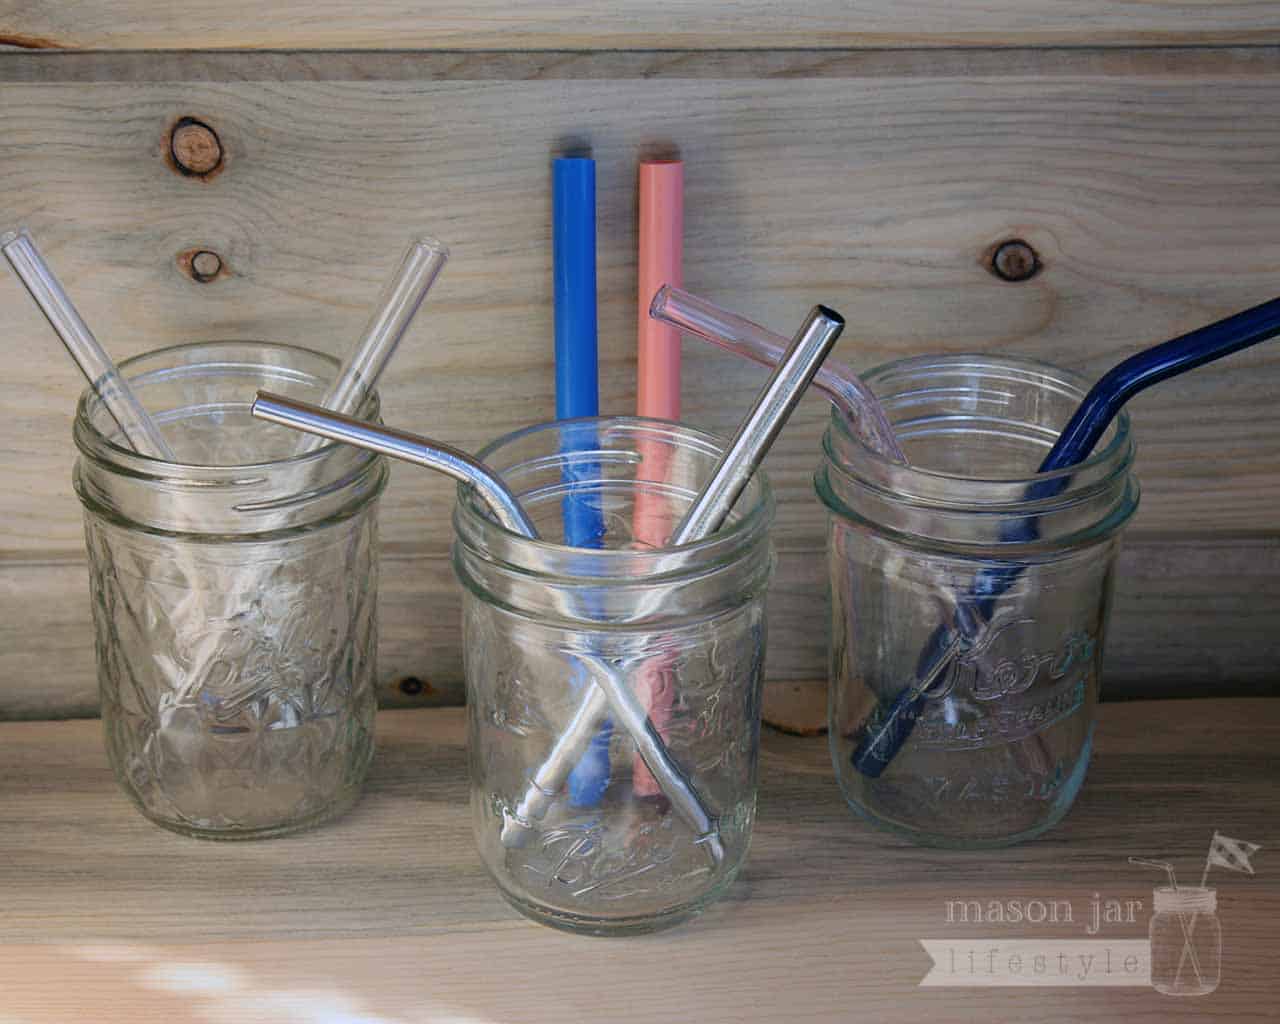 Mason Jar Lifestyle short reusable straws for kids and cocktails - stainless steel, glass, and silicone